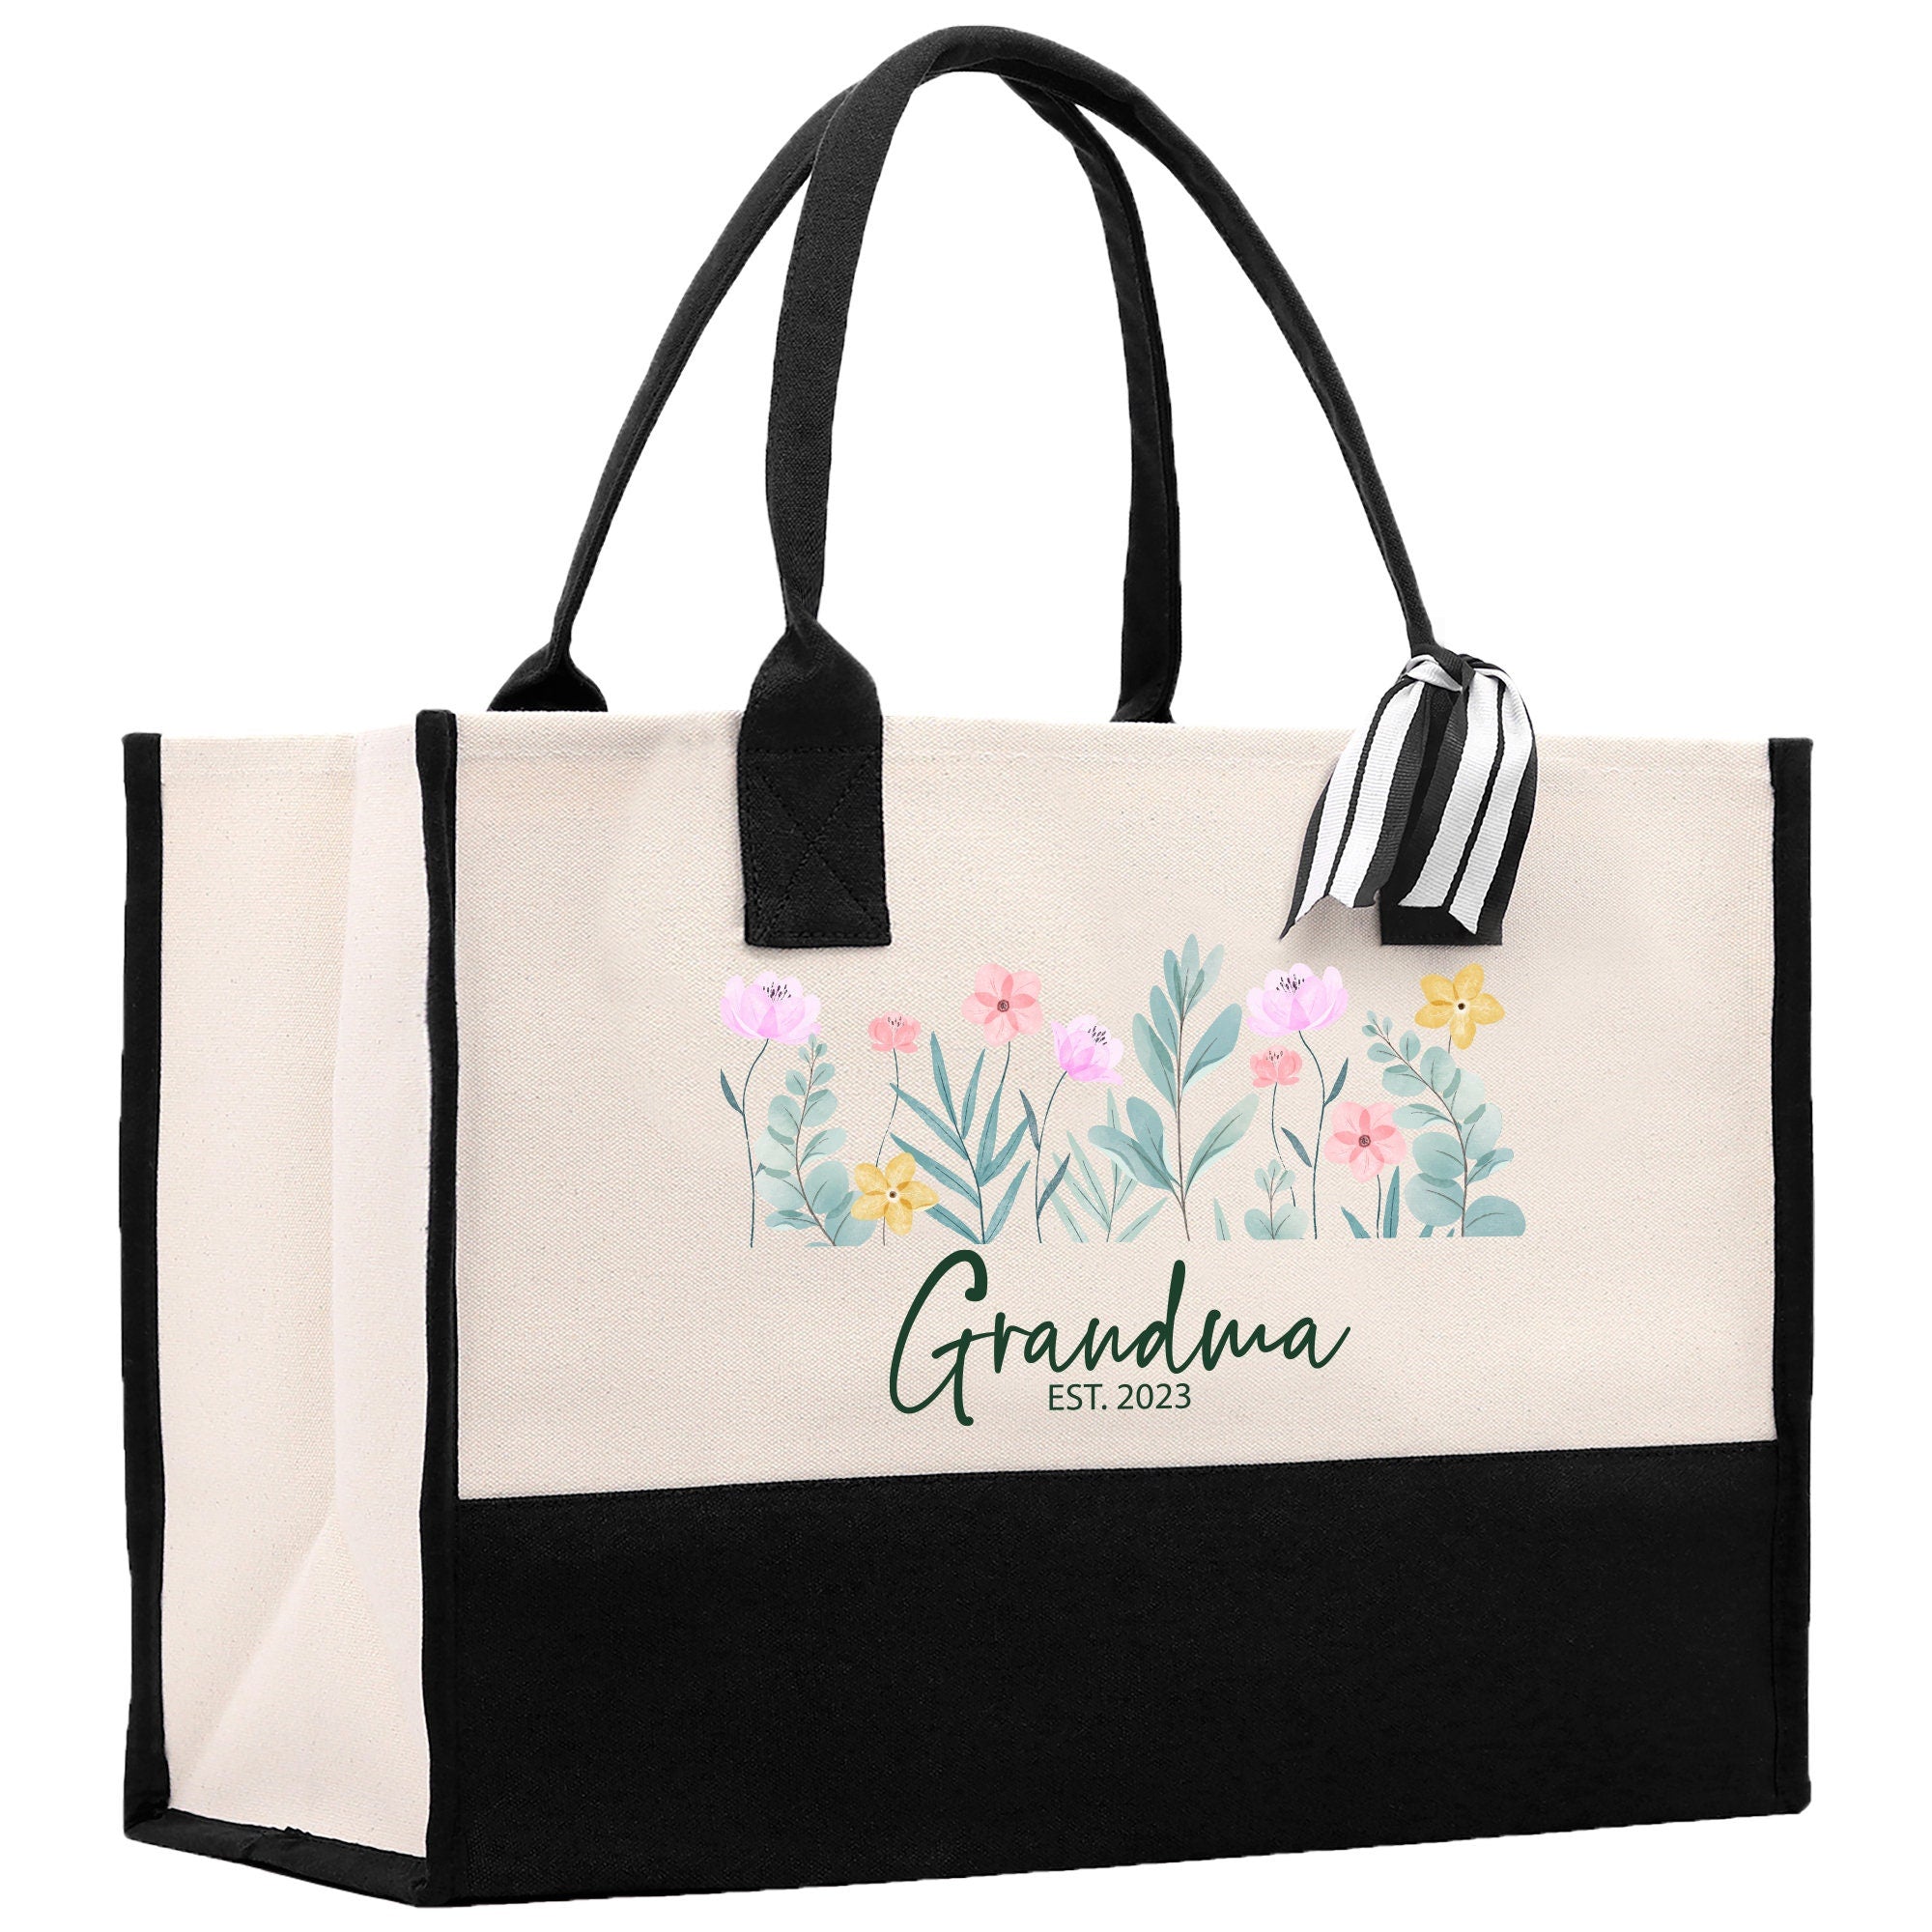 a black and white bag with flowers on it